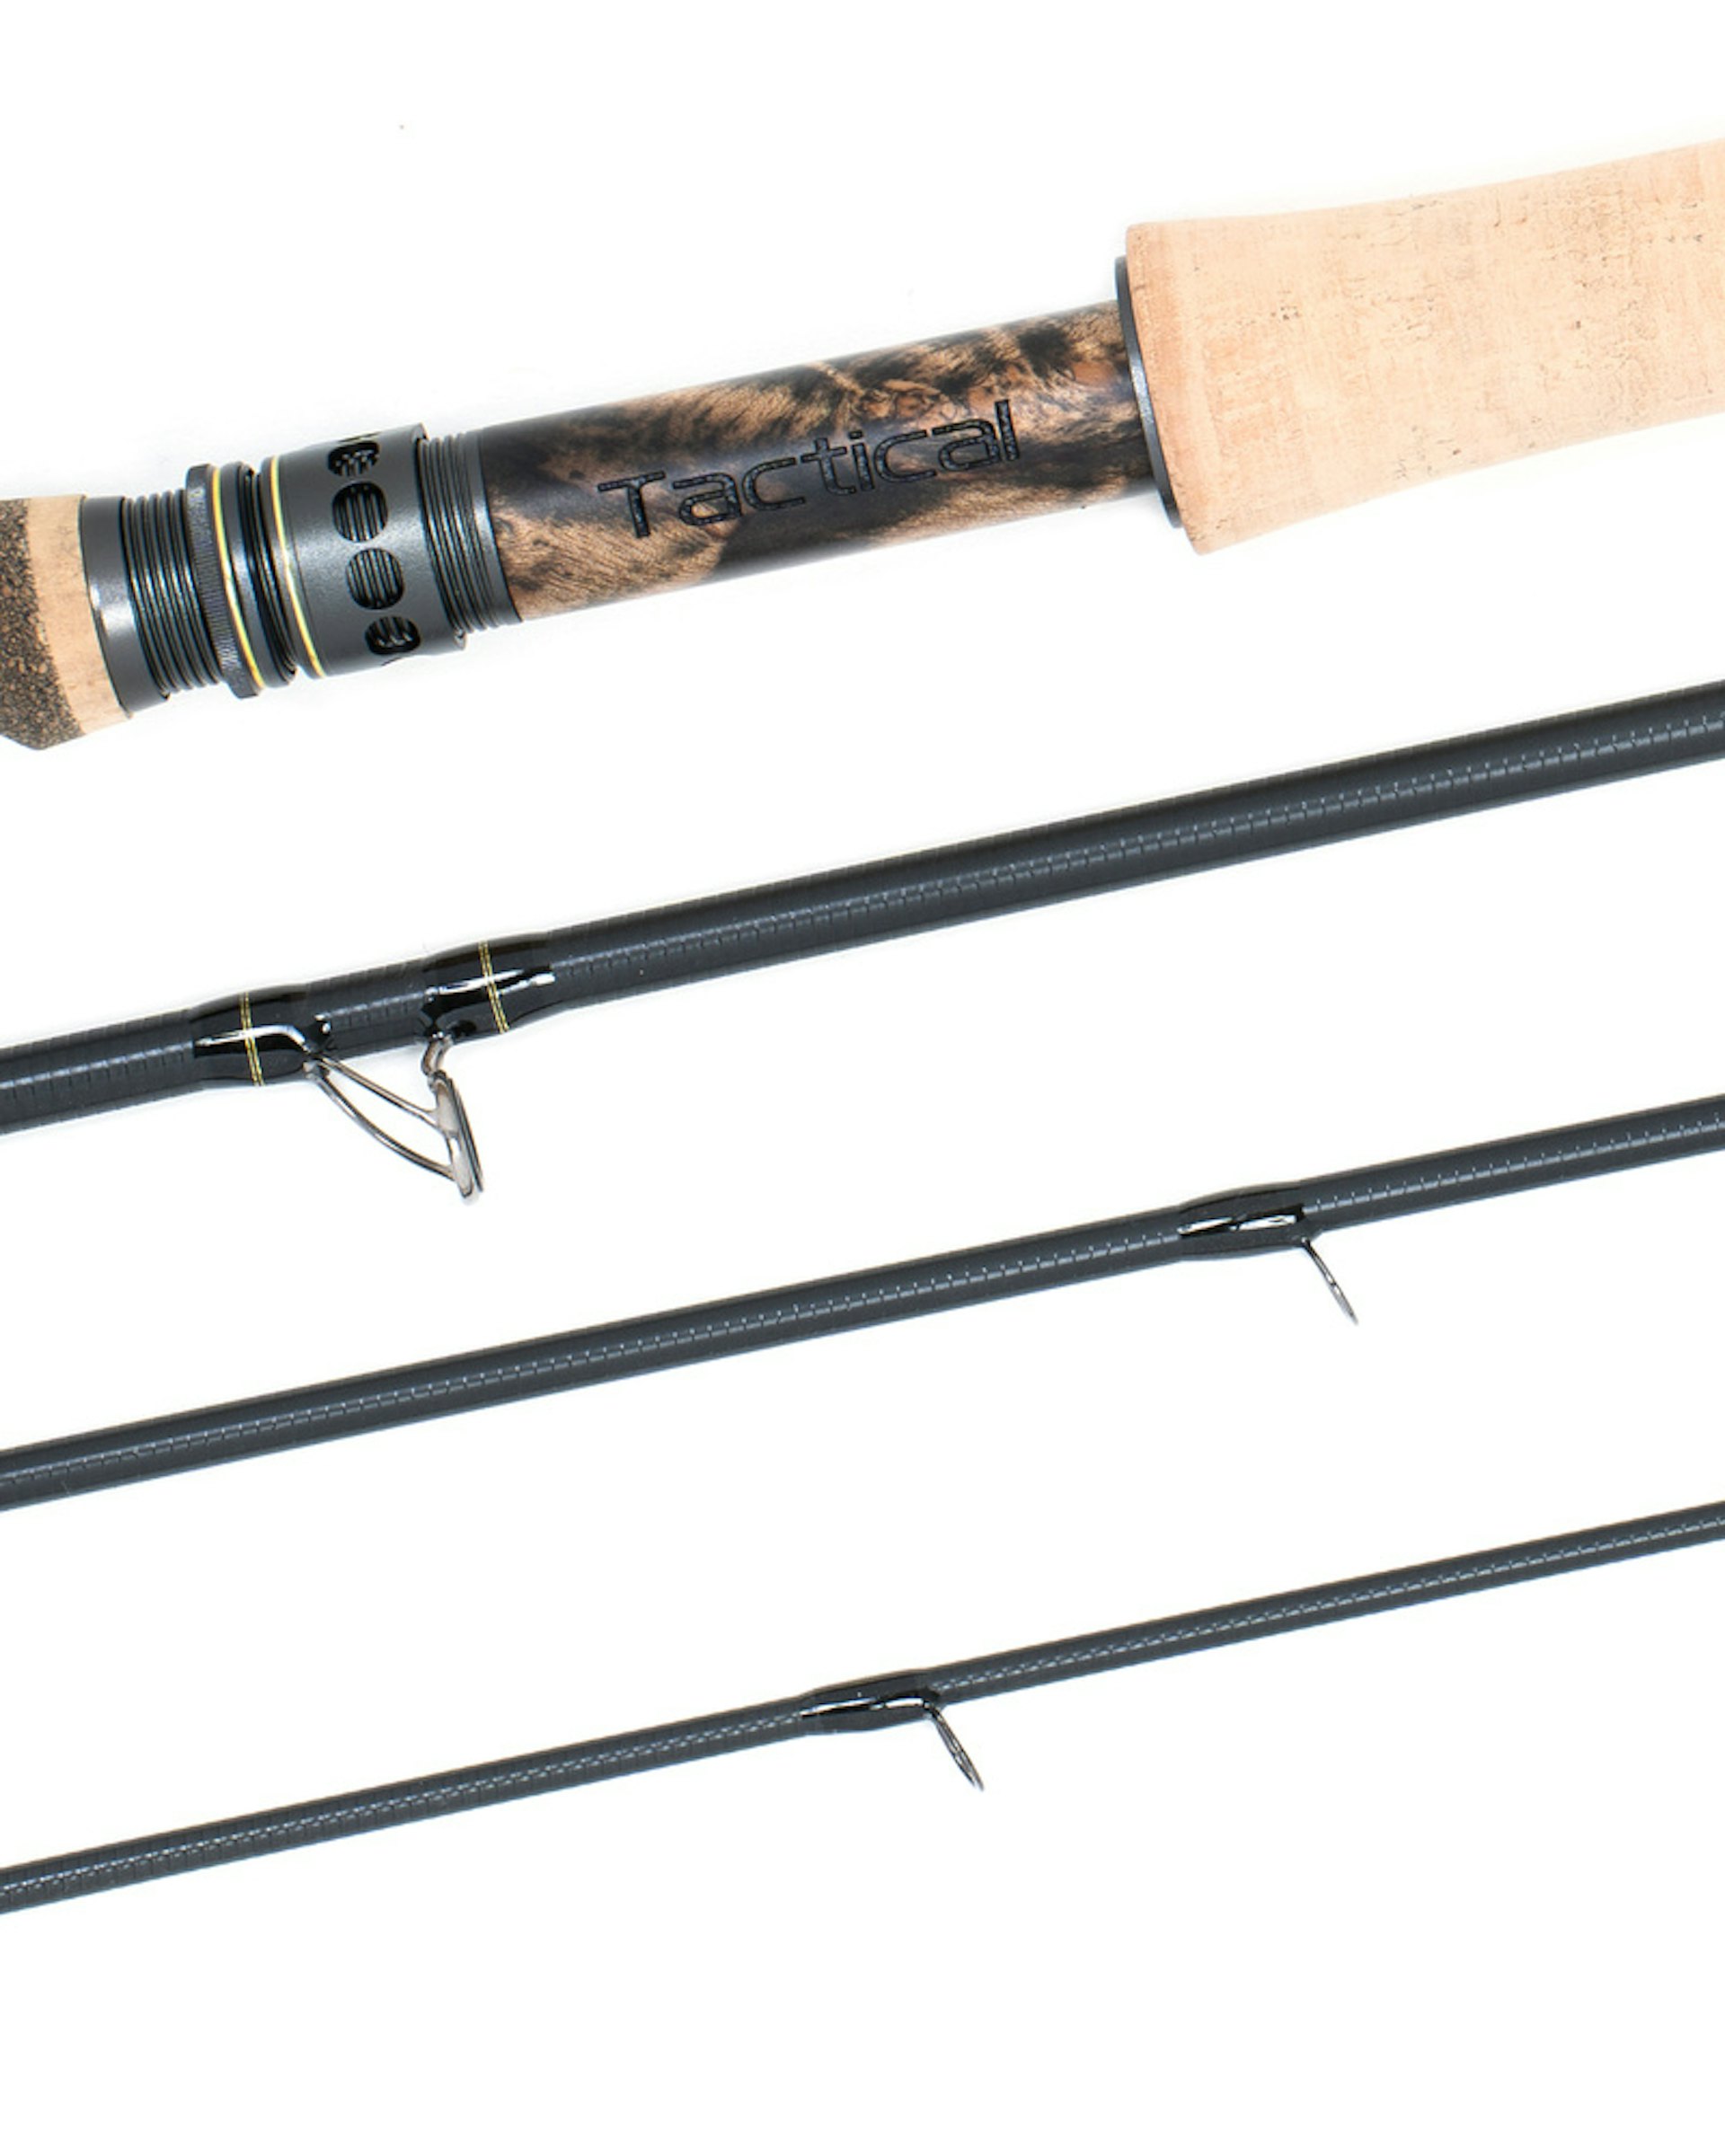 Fly Fishing Rods Set 9FT #5/6wt Fly Rod and Reel Combos Set Fishing Tackle